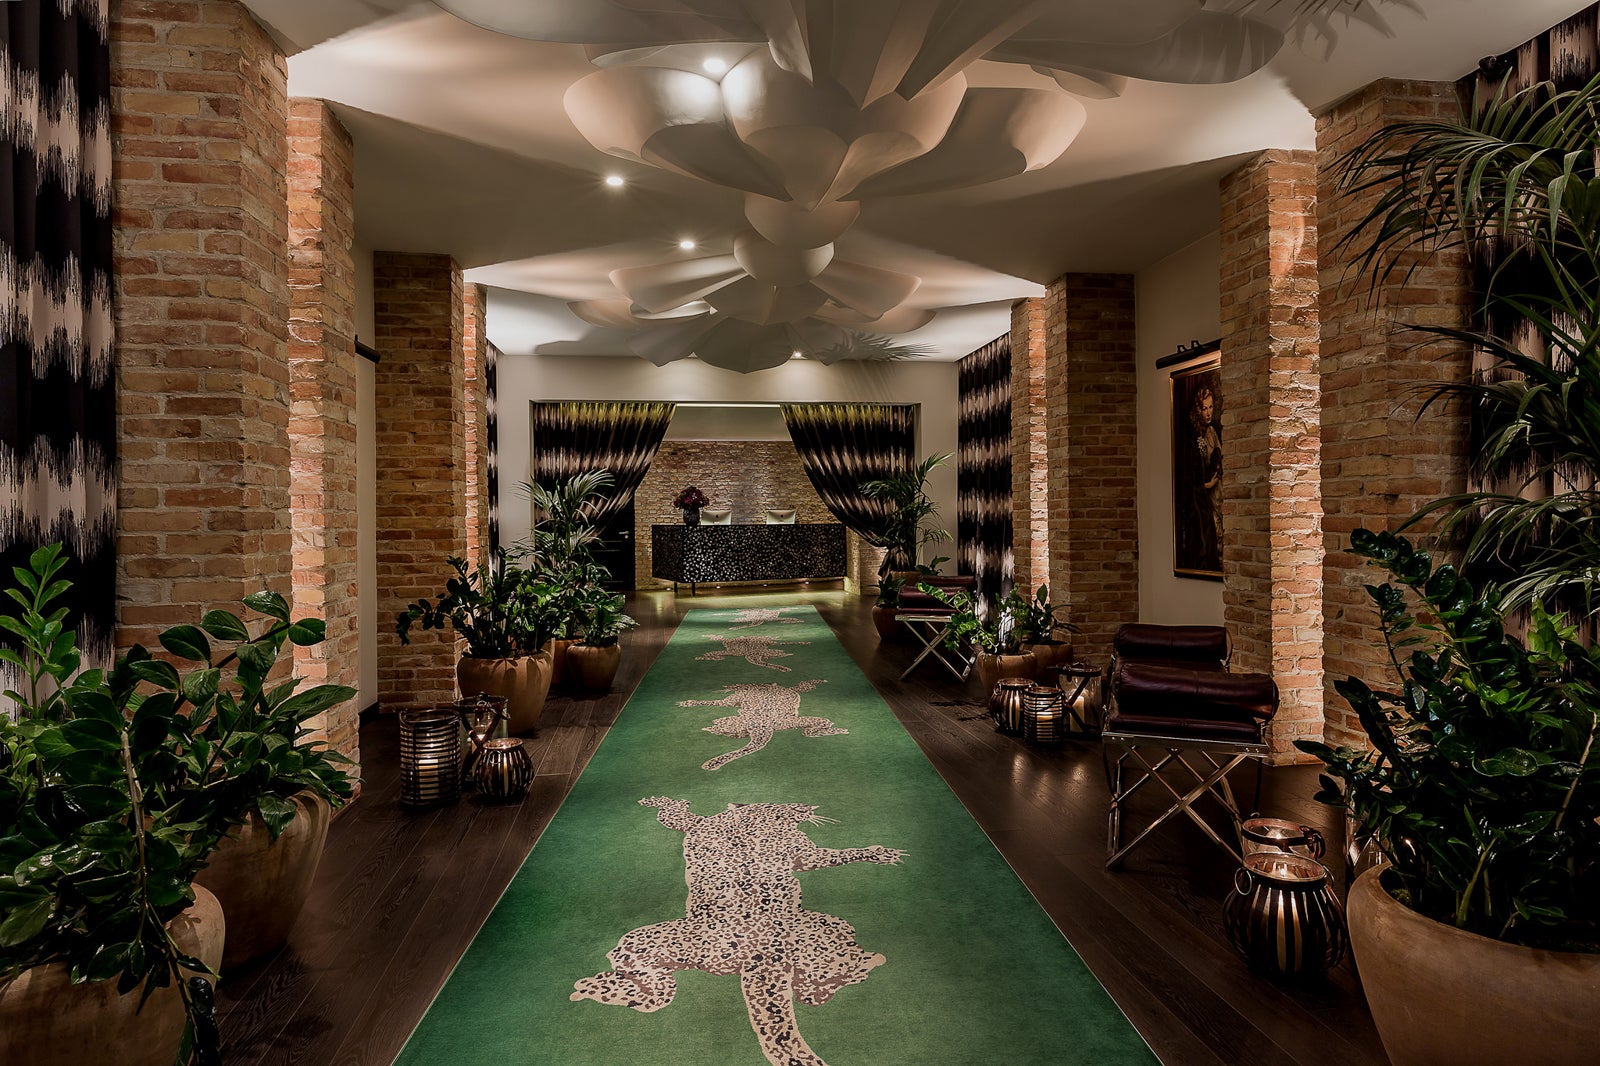 The dramatic reception area at Hotel Zoo